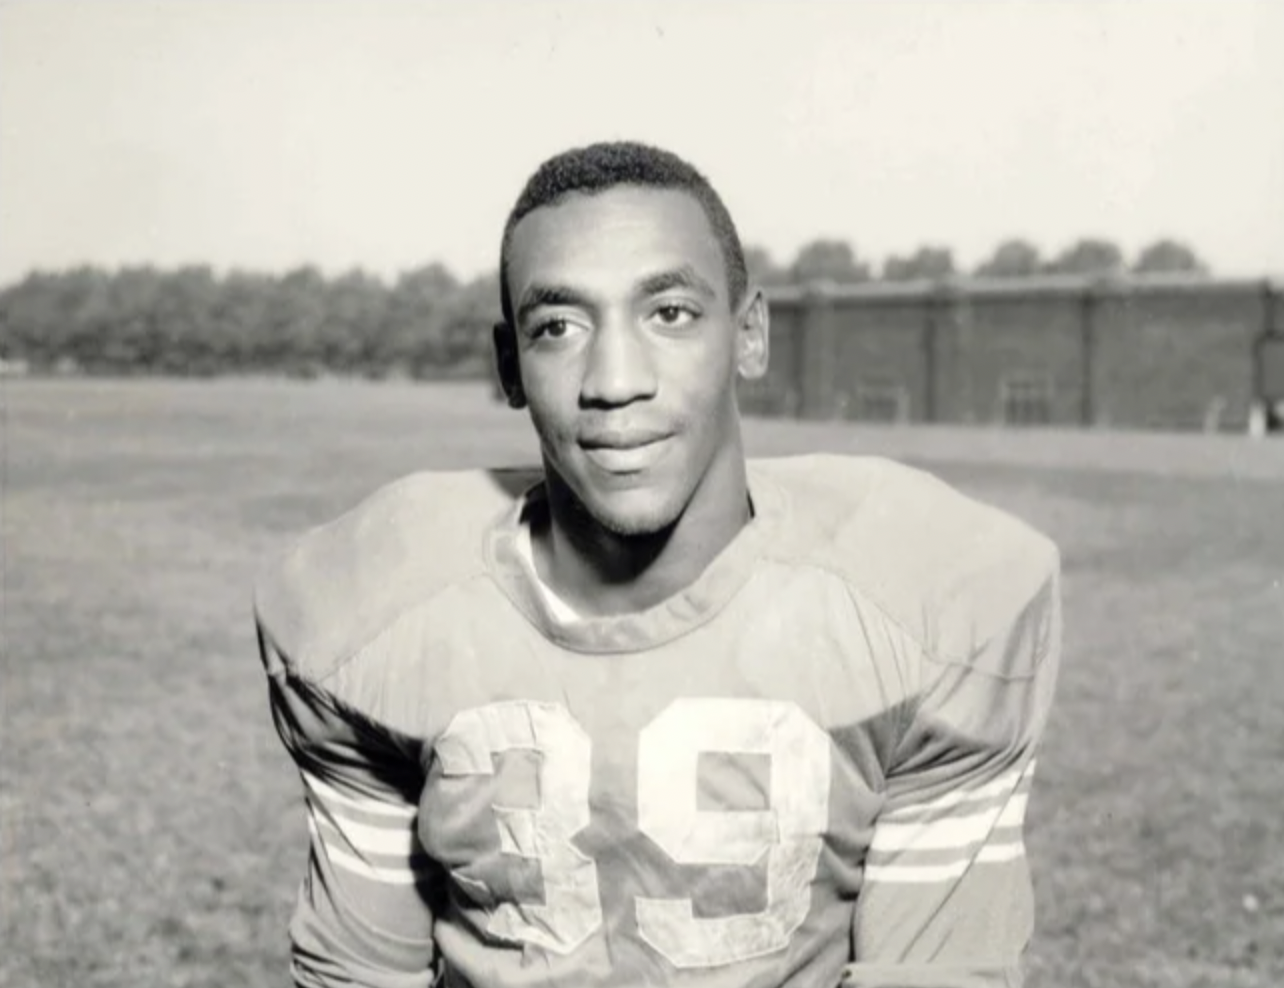 Bill Cosby when he played fullback in college for the Temple Owls.